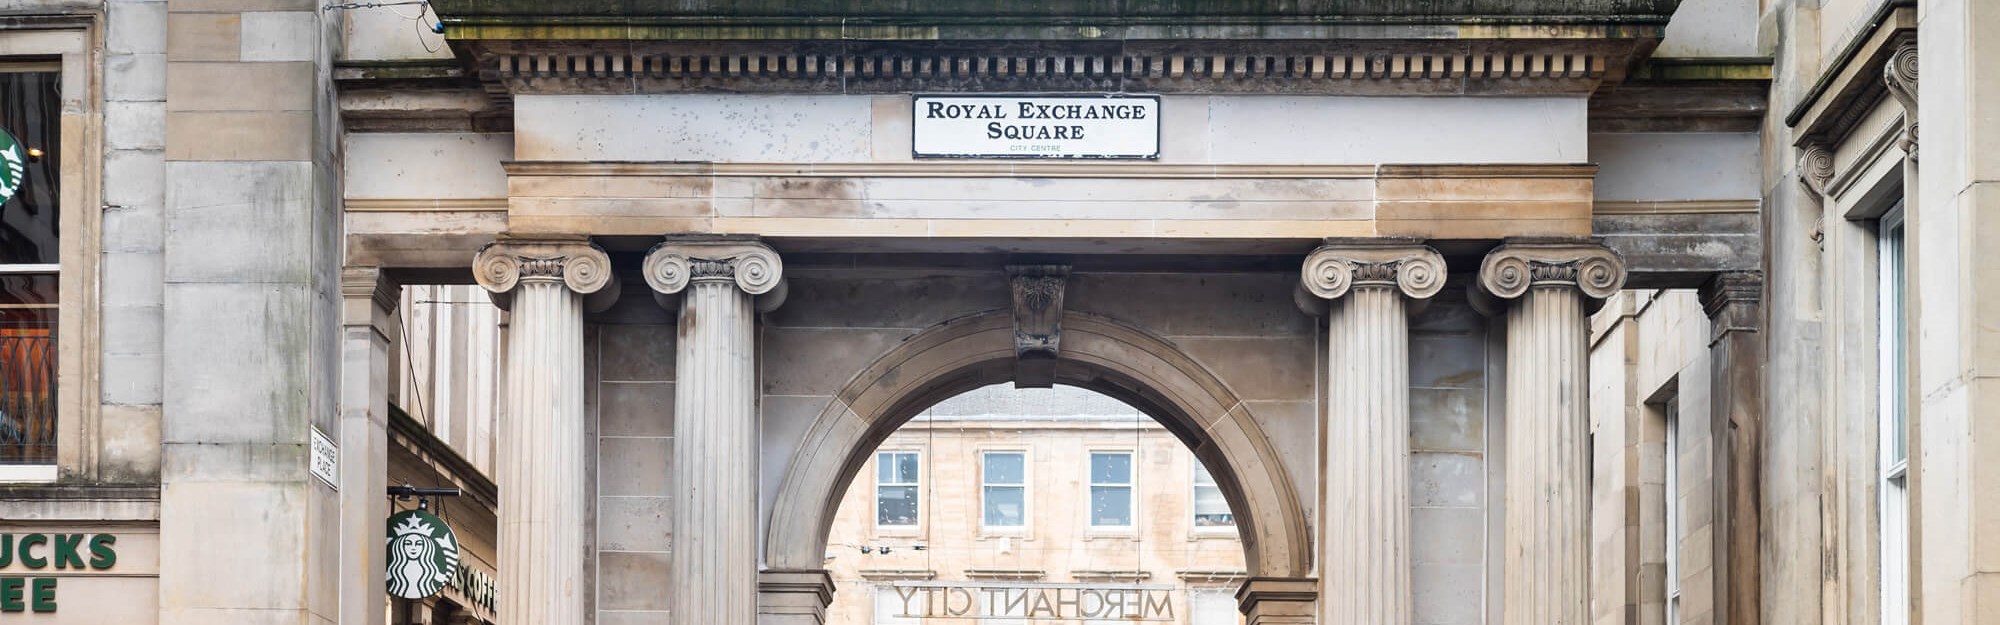 Royal Exchange Square archway in Glasgow